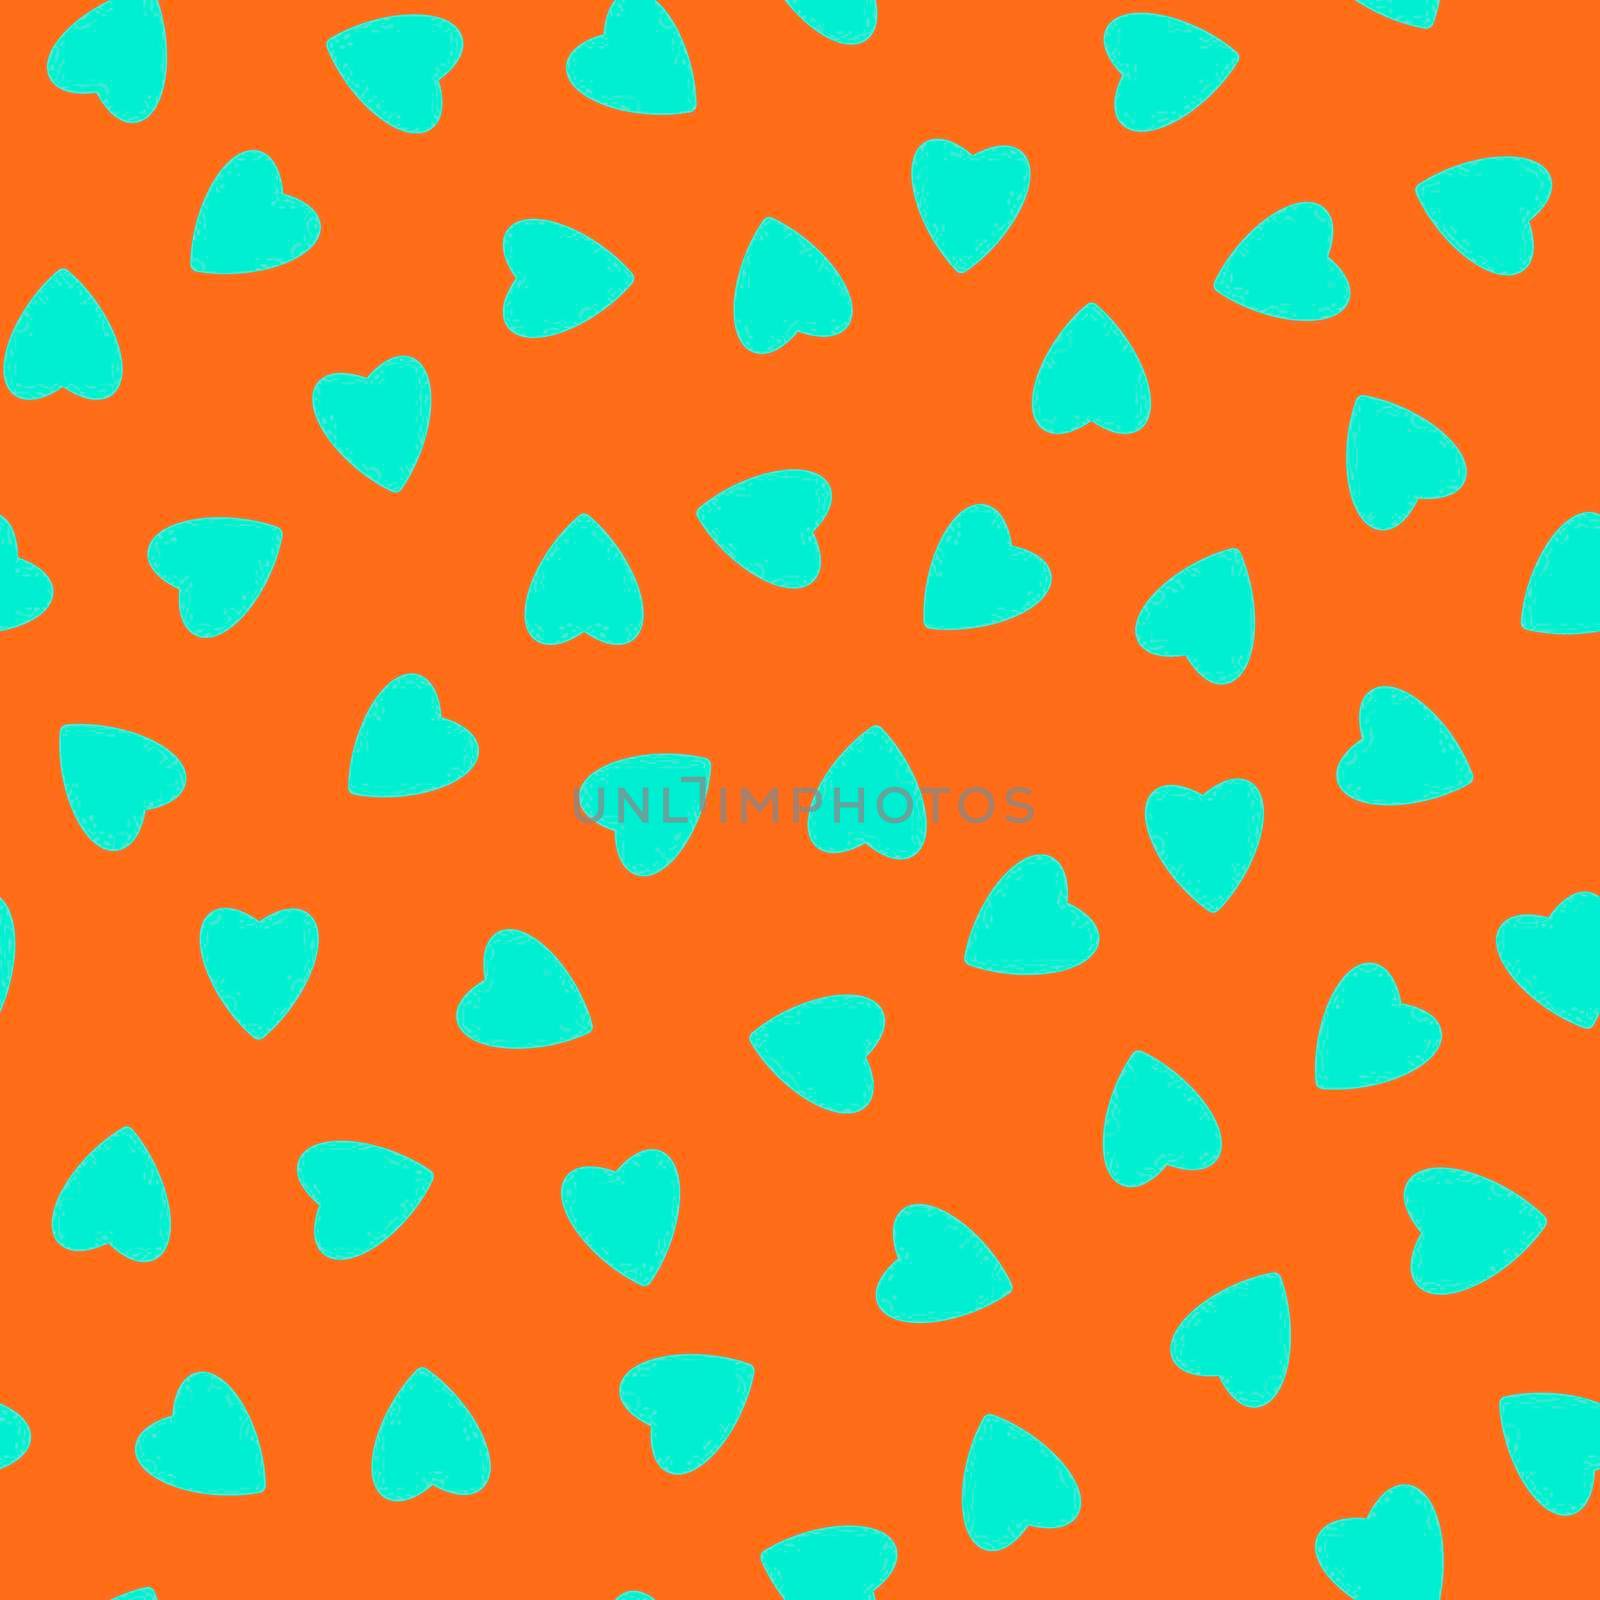 Simple hearts seamless pattern,endless chaotic texture made of tiny heart silhouettes.Valentines,mothers day background.Great for Easter,wedding,scrapbook,gift wrapping paper,textiles.Azure on orange by Angelsmoon